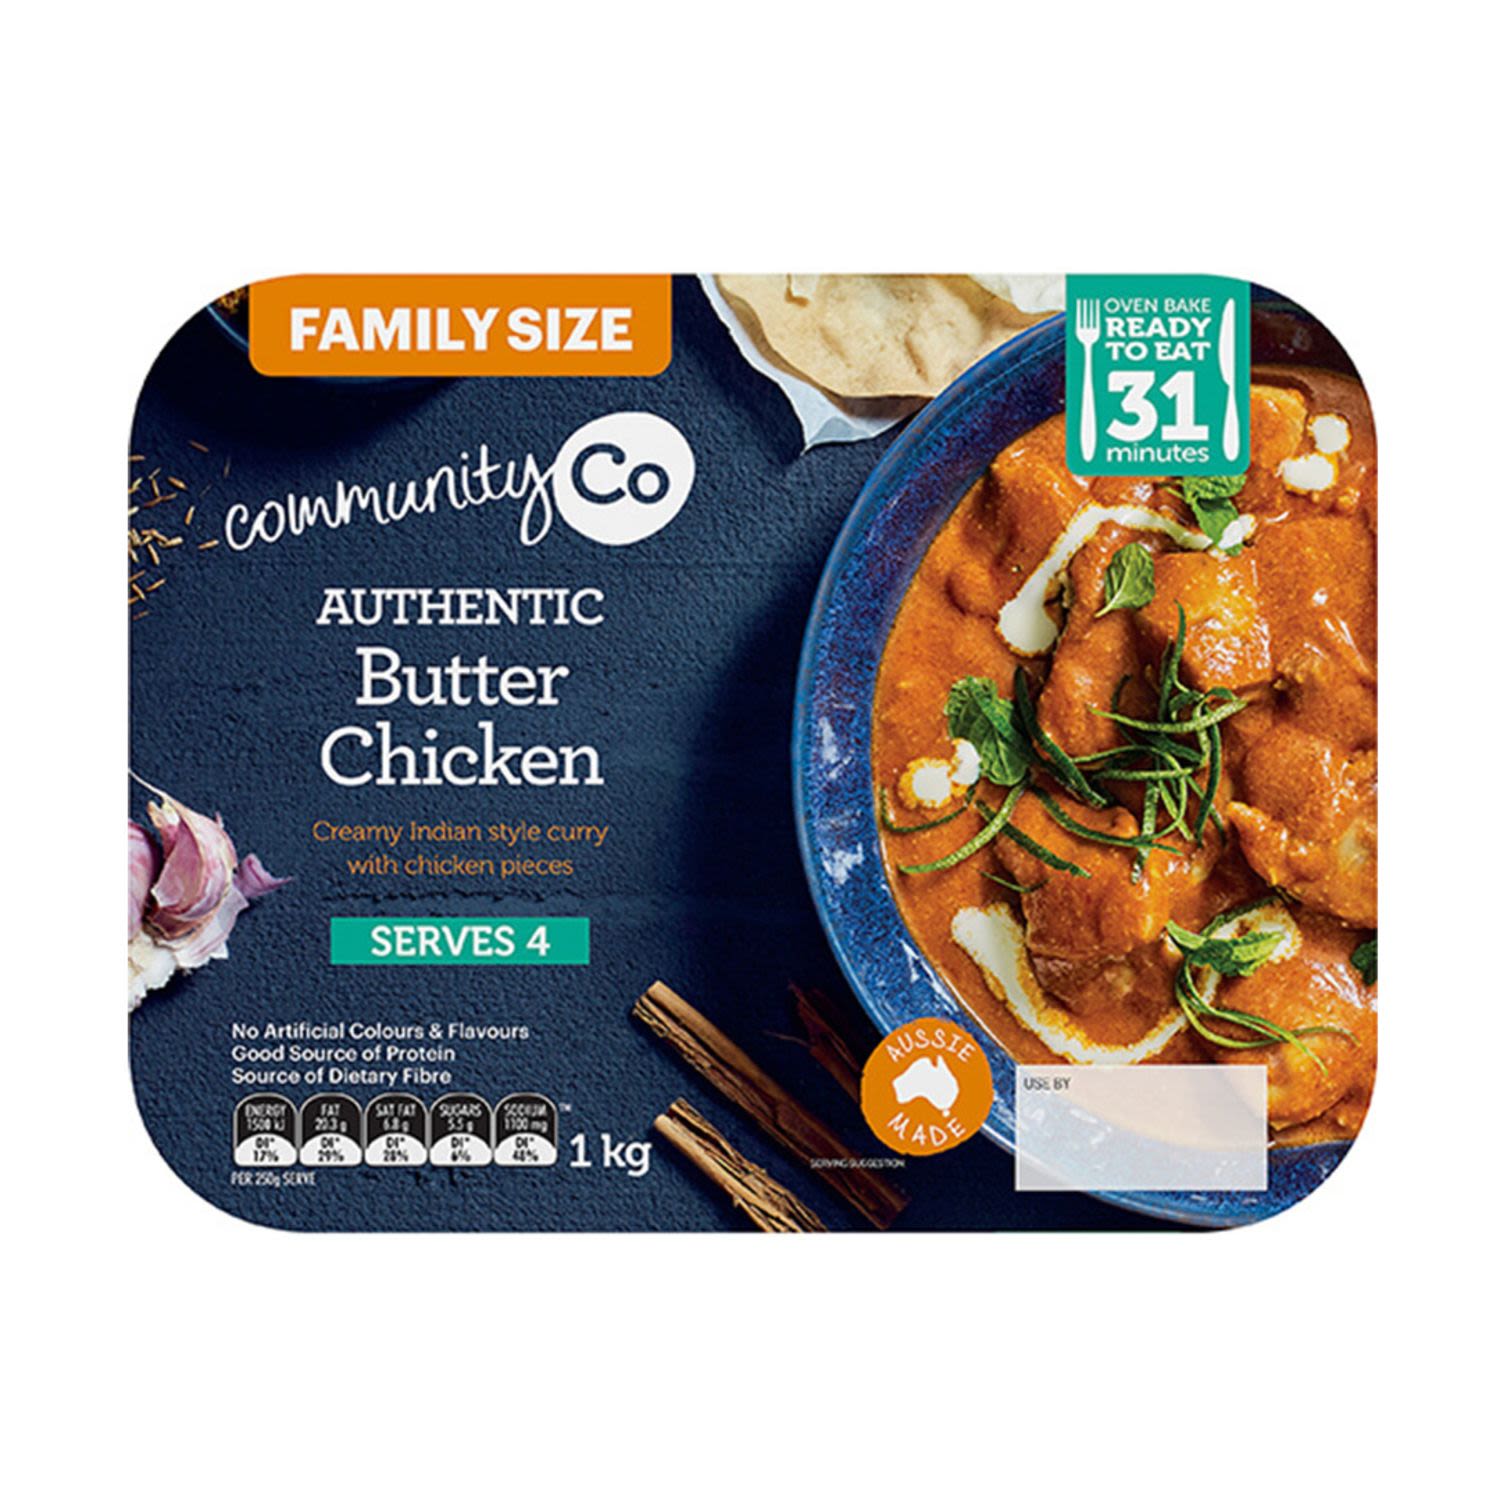 Community Co Authentic Butter Chicken Family Size, 1 Kilogram